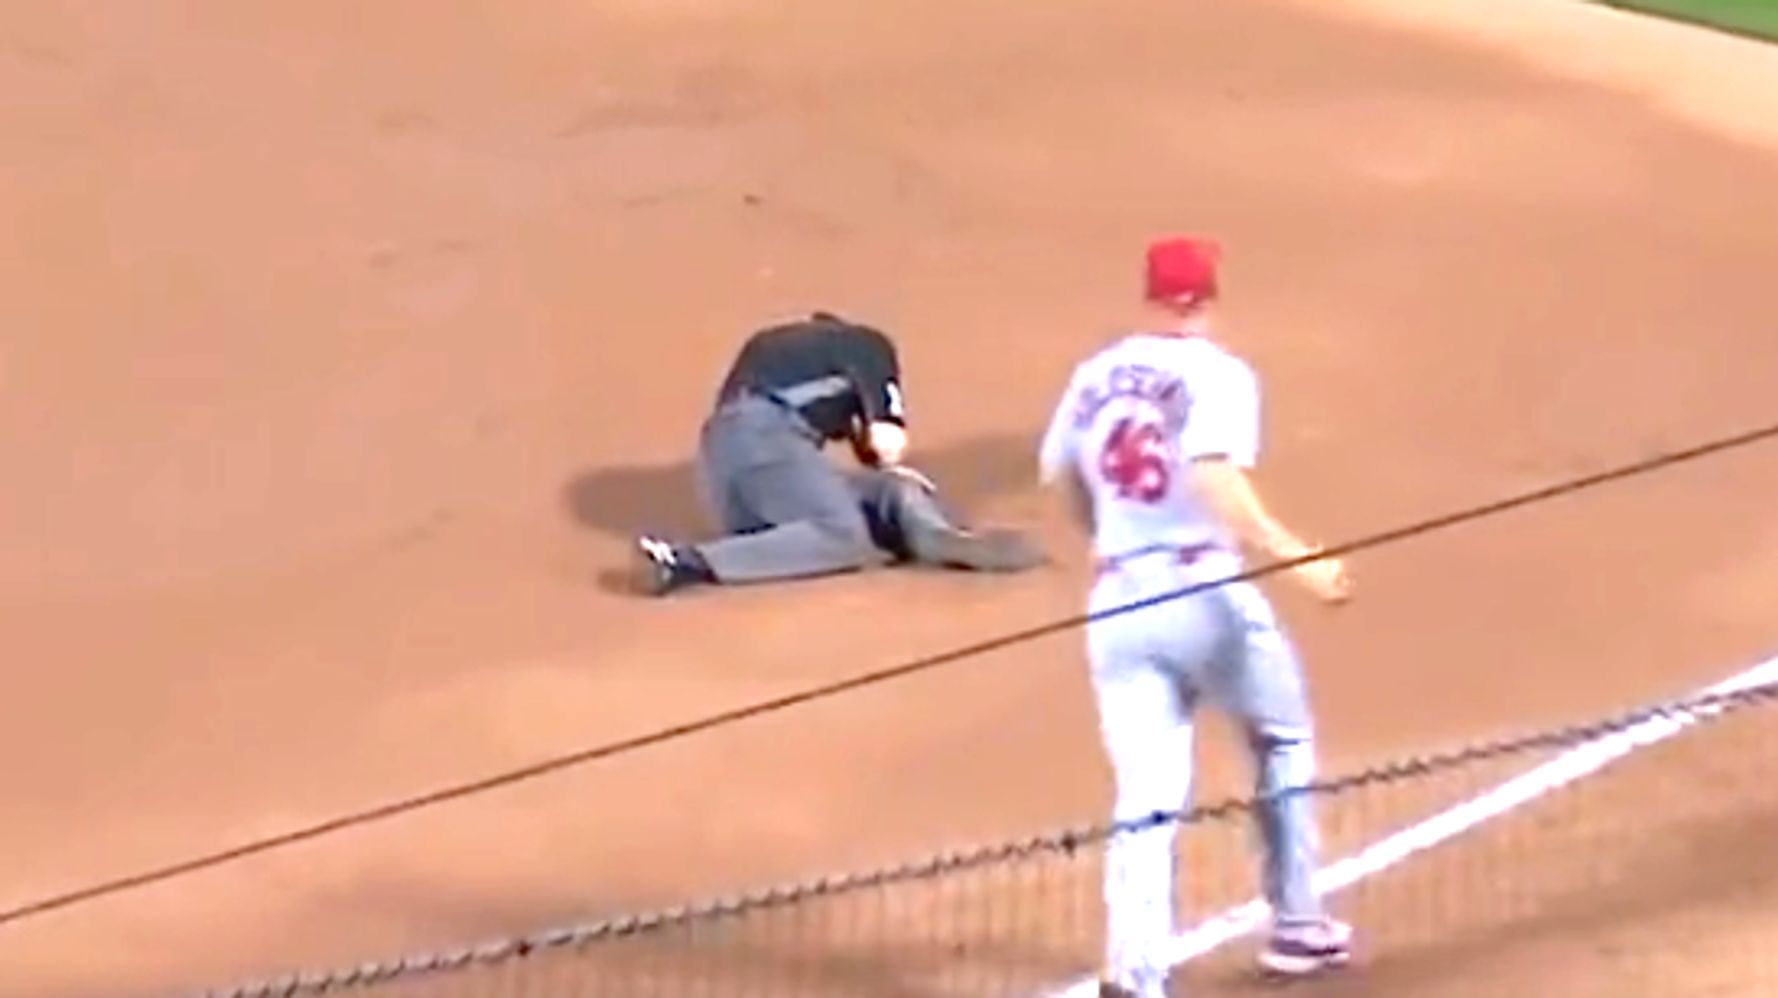 Video: MLB Ump Hit in Face by Wild Throw During Cardinals-Mets Game